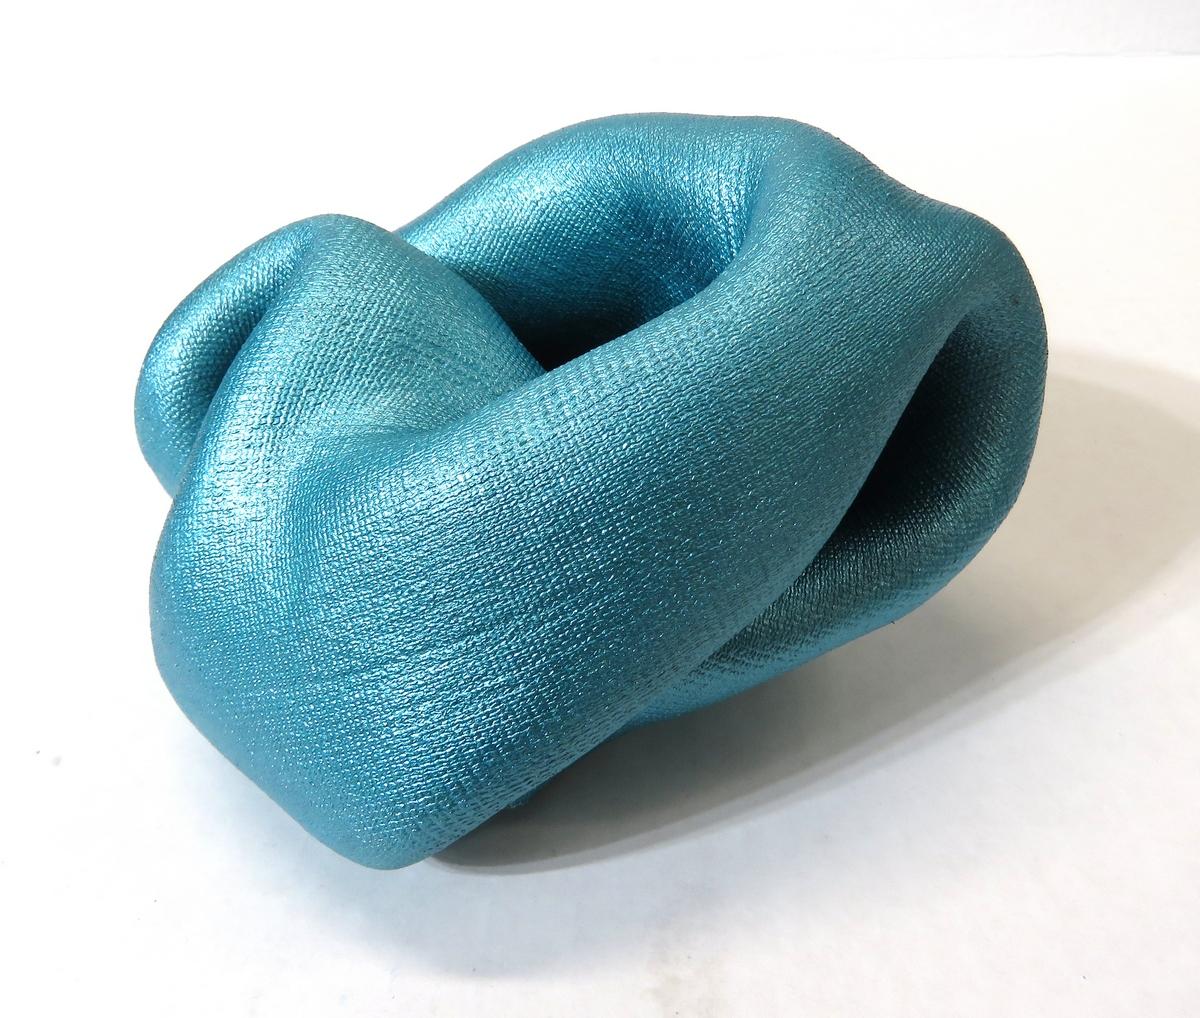 Ted VanCleave Abstract Sculpture -  Sinuosity mini in aqua (metallic art, small sculpture, abstract, smooth, curvy)